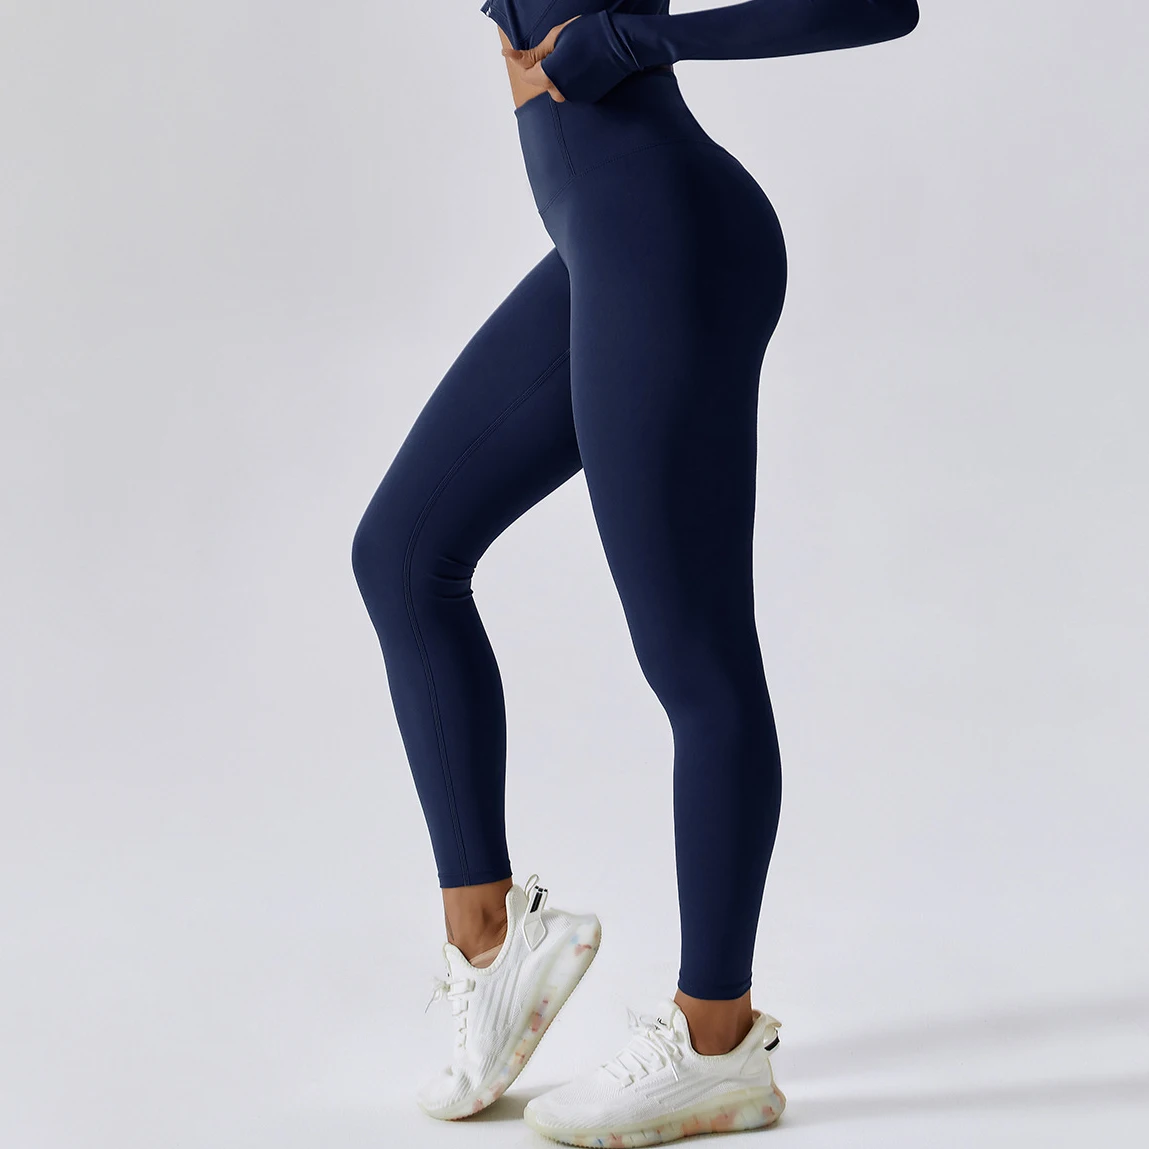 Latest spandex workout leggings girls in